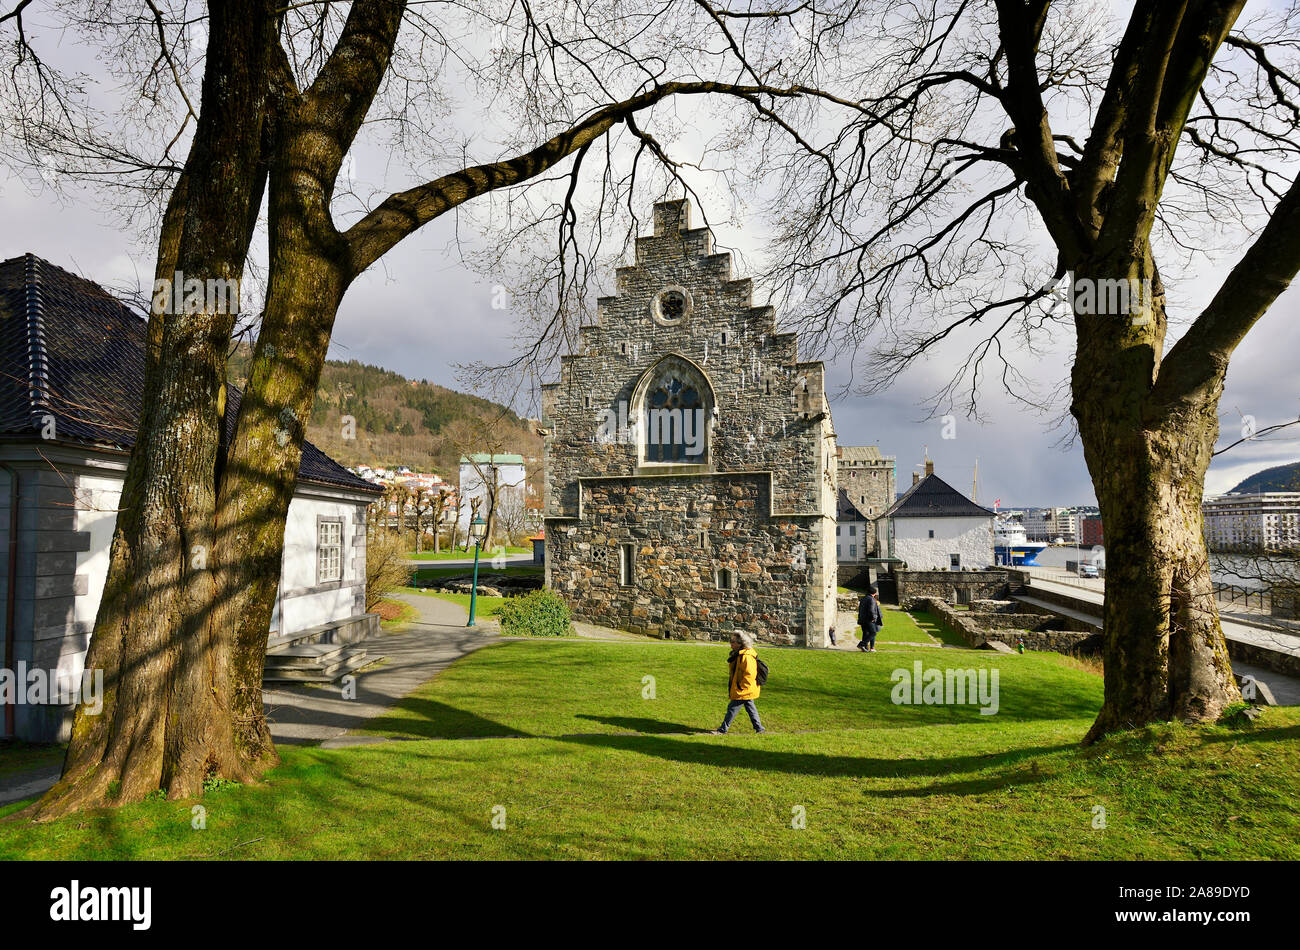 The Bergenhus Fortress (Bergenhus festning) dates back to the 13th century and is one of the oldest and best preserved castles in Norway. Bergen, Norw Stock Photo